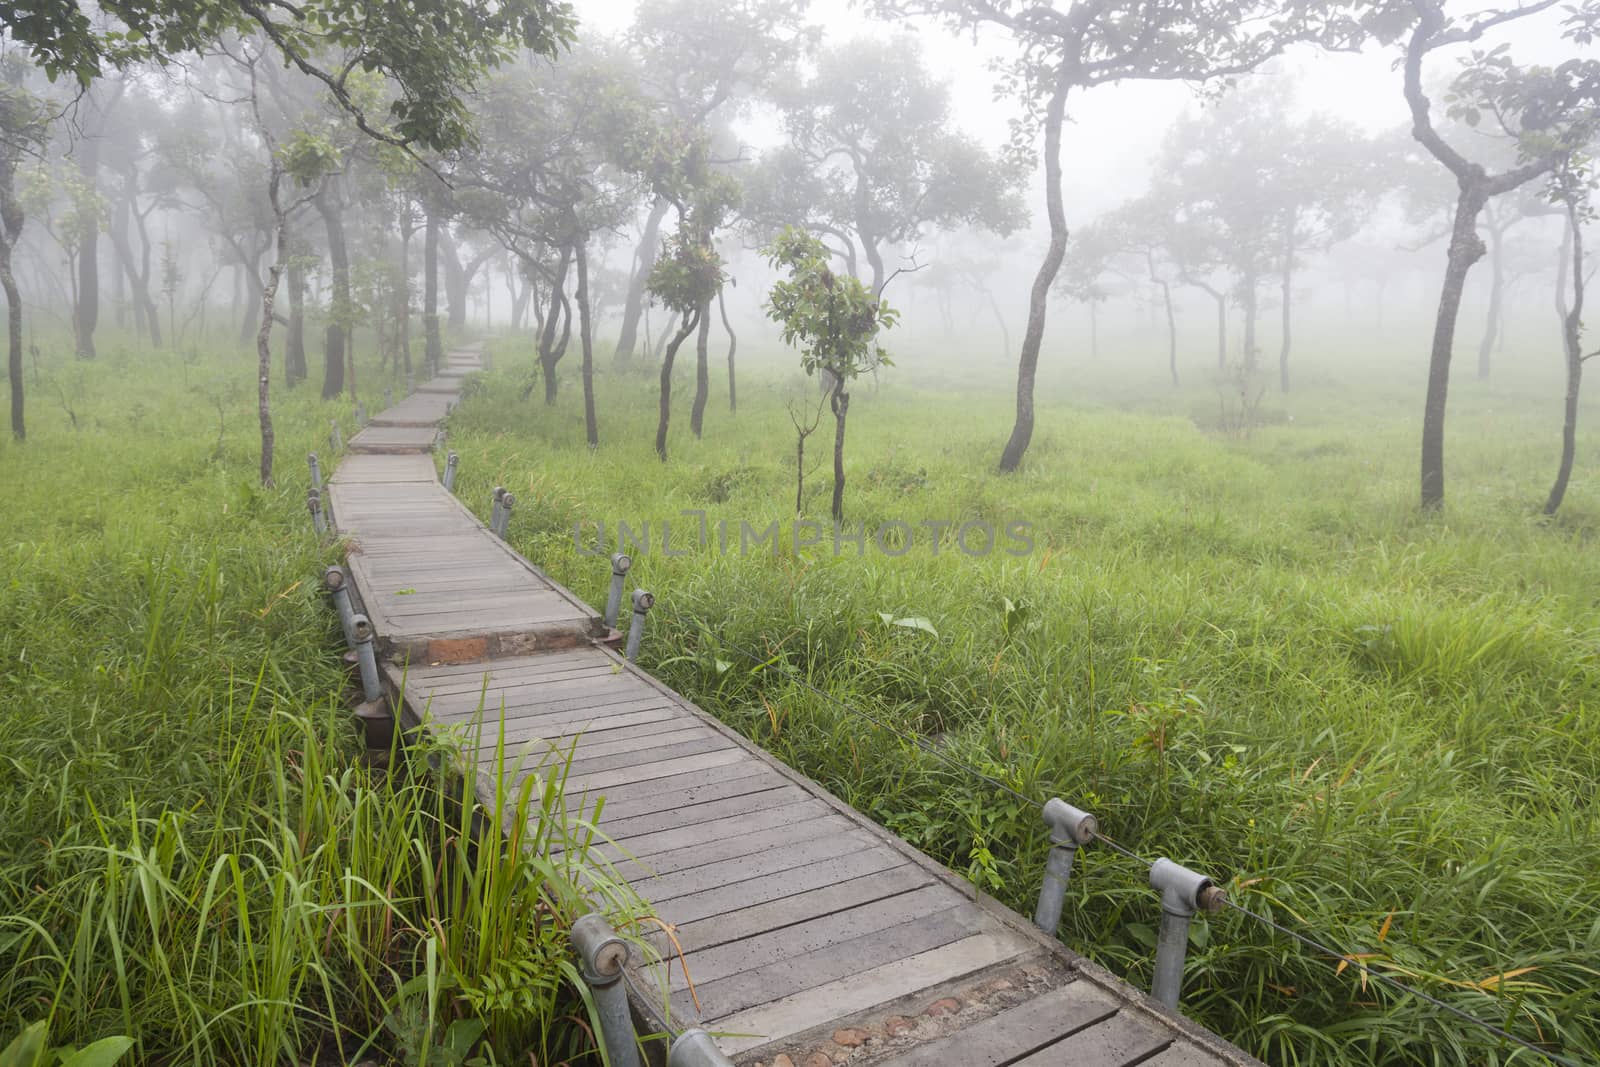 Wooden bridge walkway.Sides of the trees and meadows.